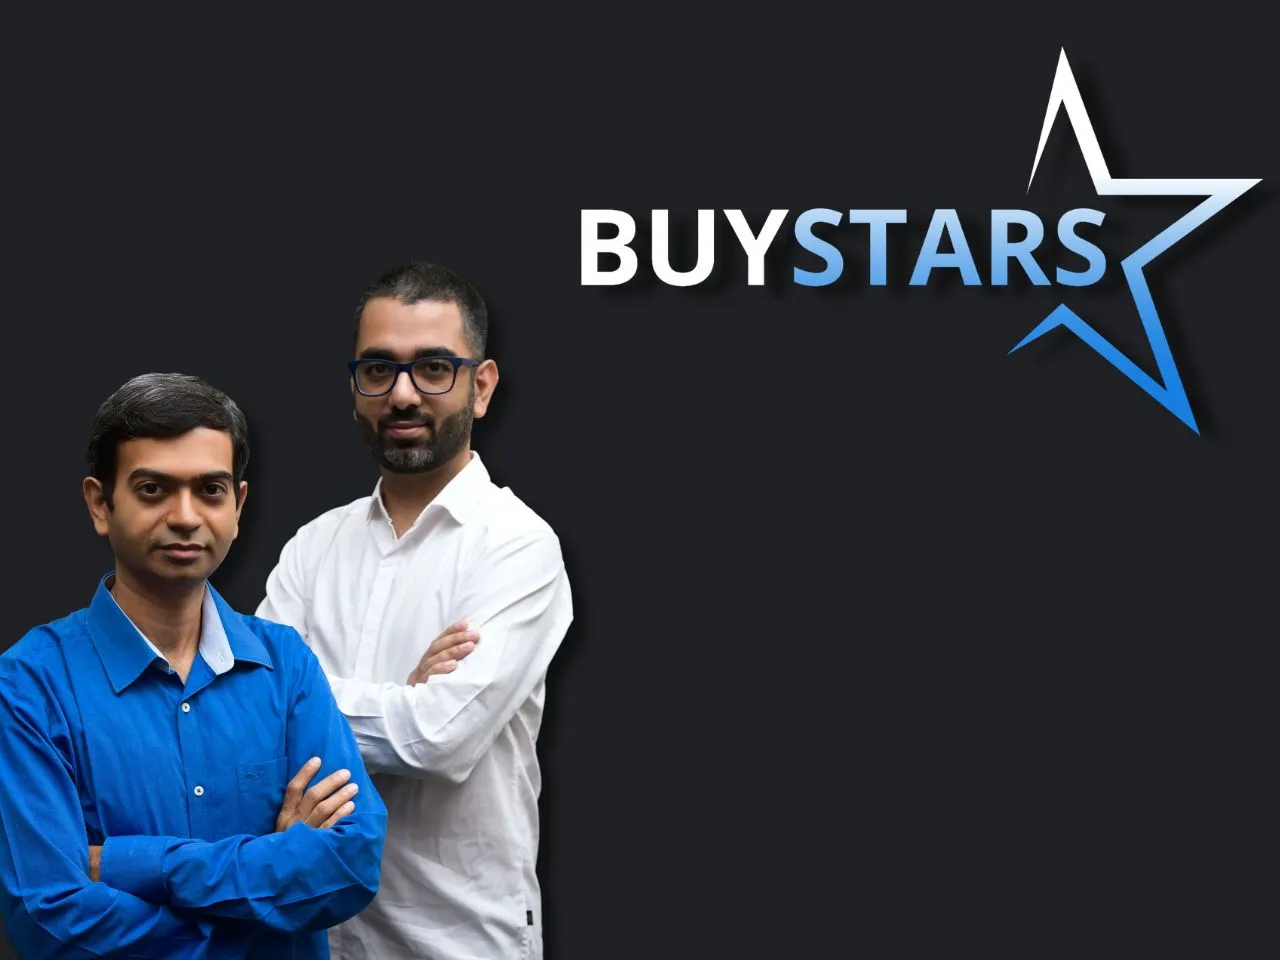 Lumikai leads $5M Pre-series A round for BuyStars